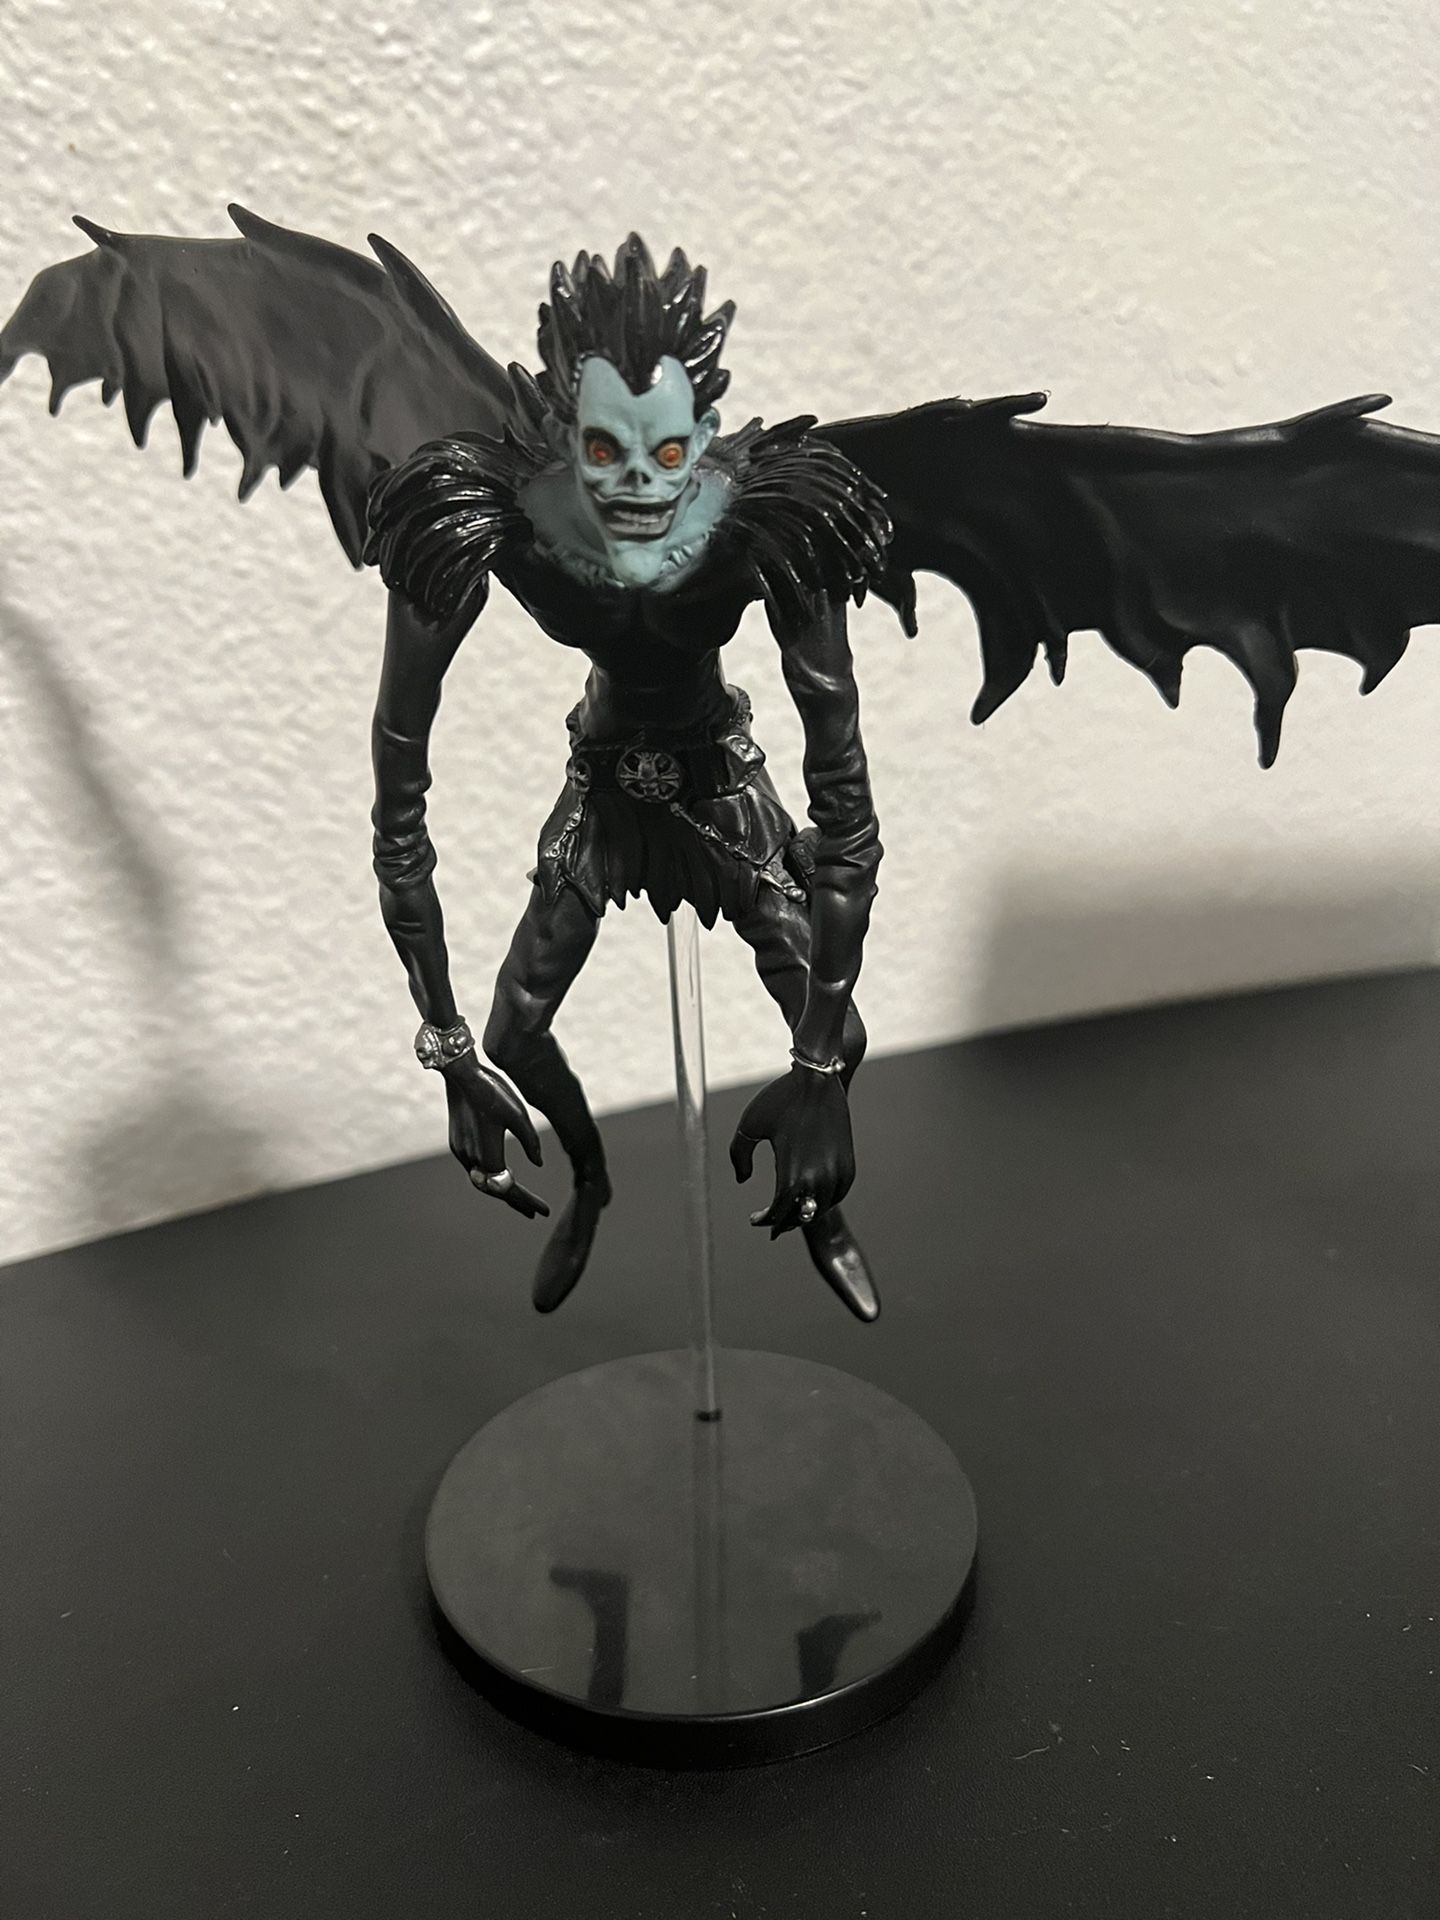 Ryuk from Death Note  Anime Action Figure!